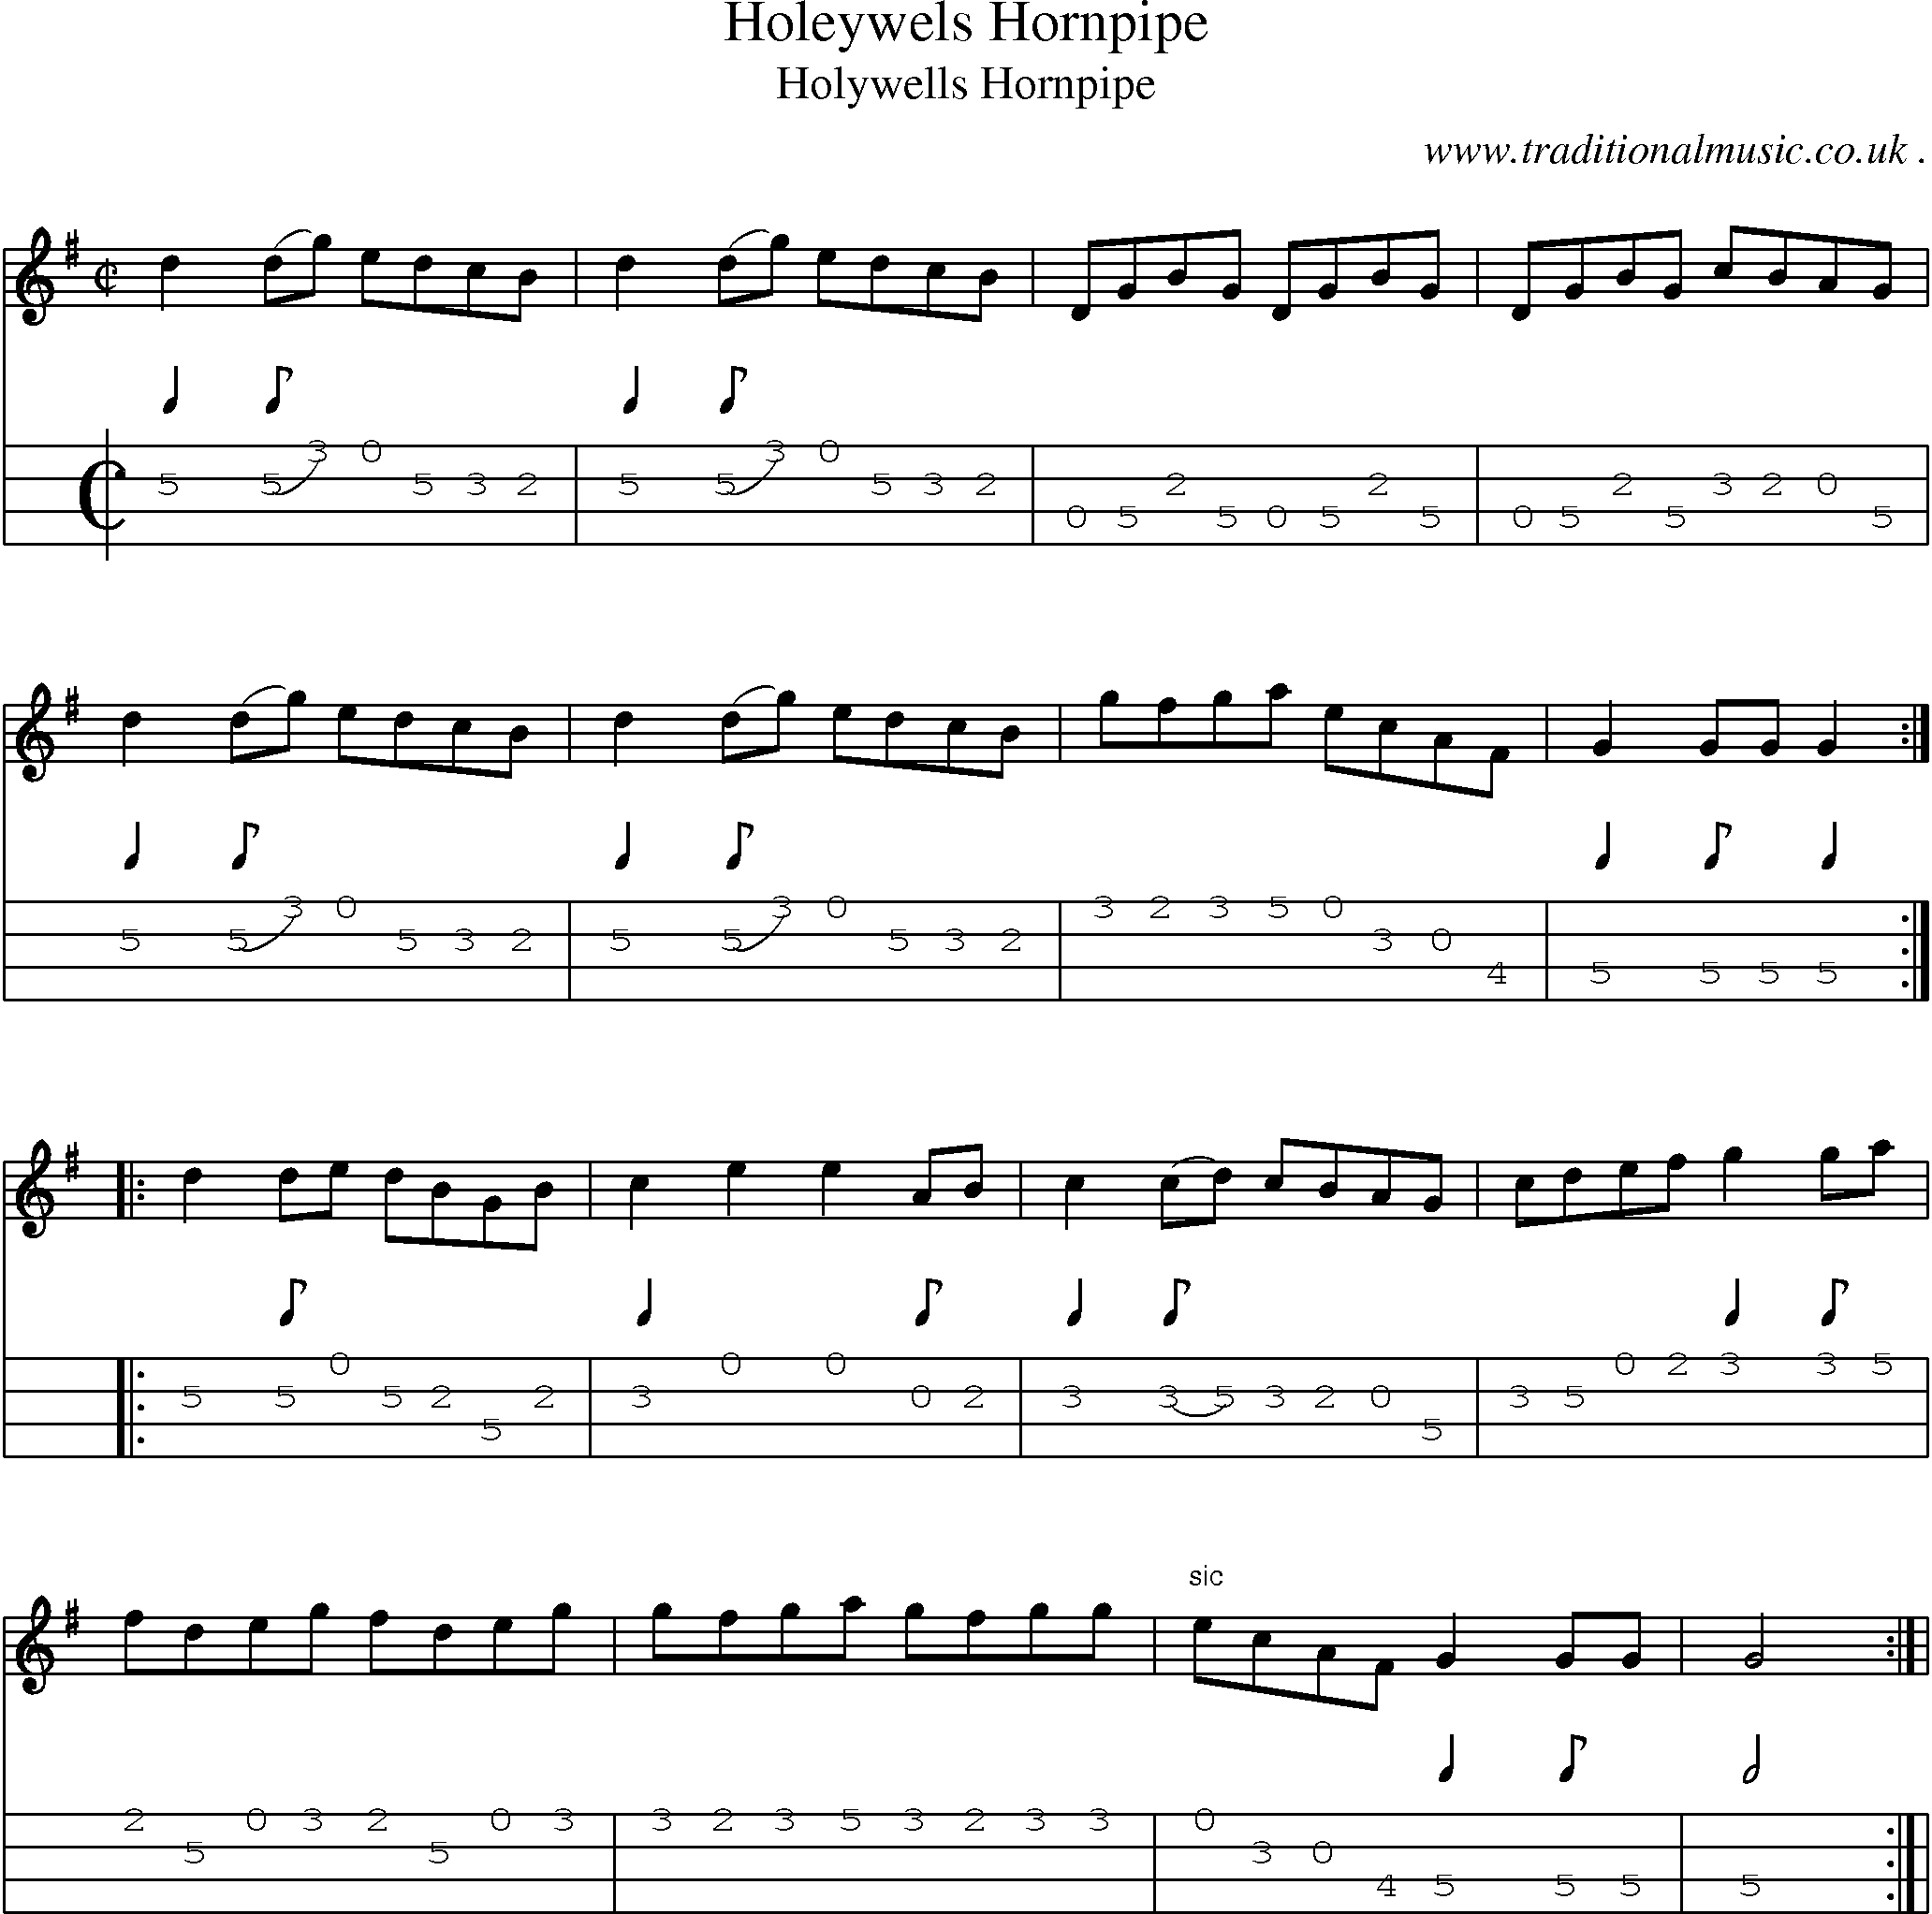 Sheet-Music and Mandolin Tabs for Holeywels Hornpipe